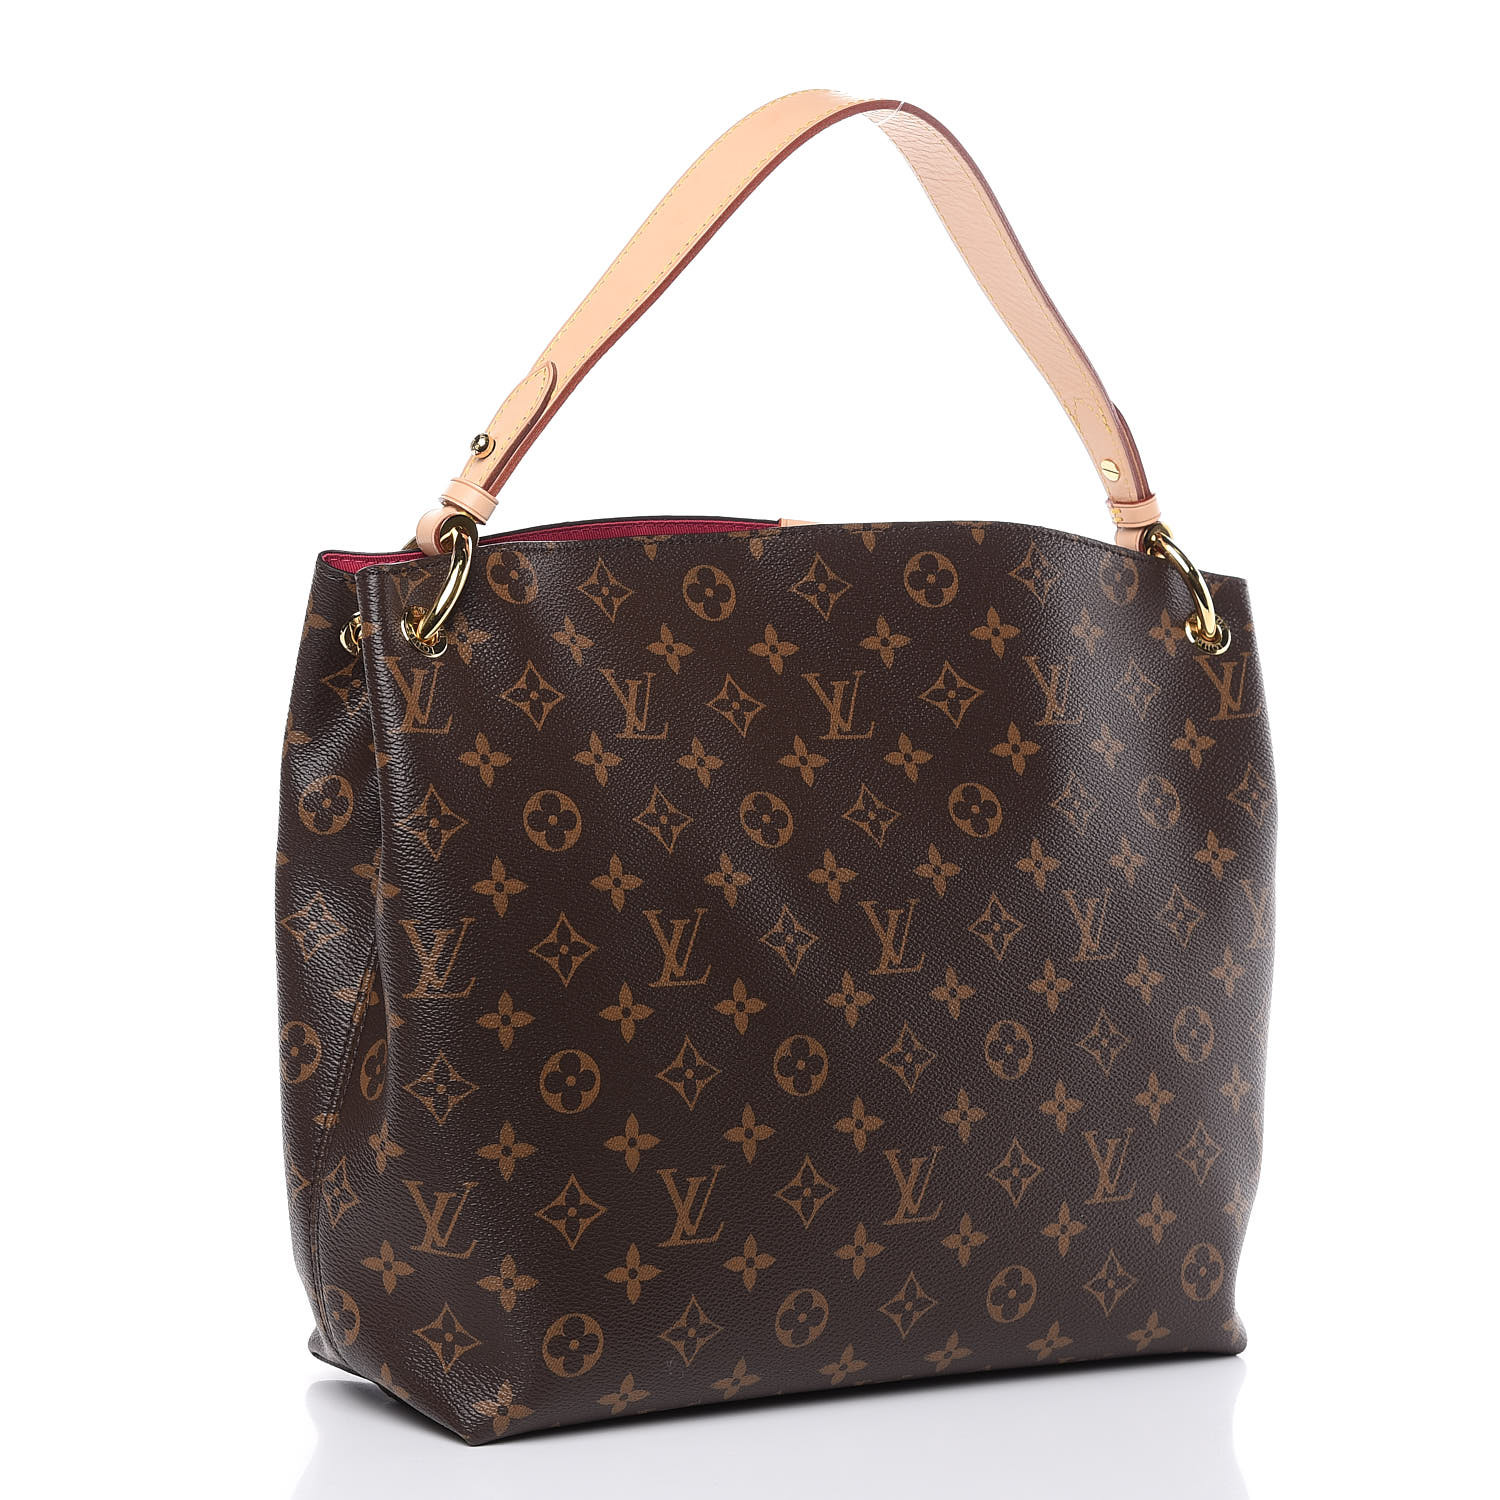 Louis Vuitton Monogram Weekend Tote PM by Ann's Fabulous Finds